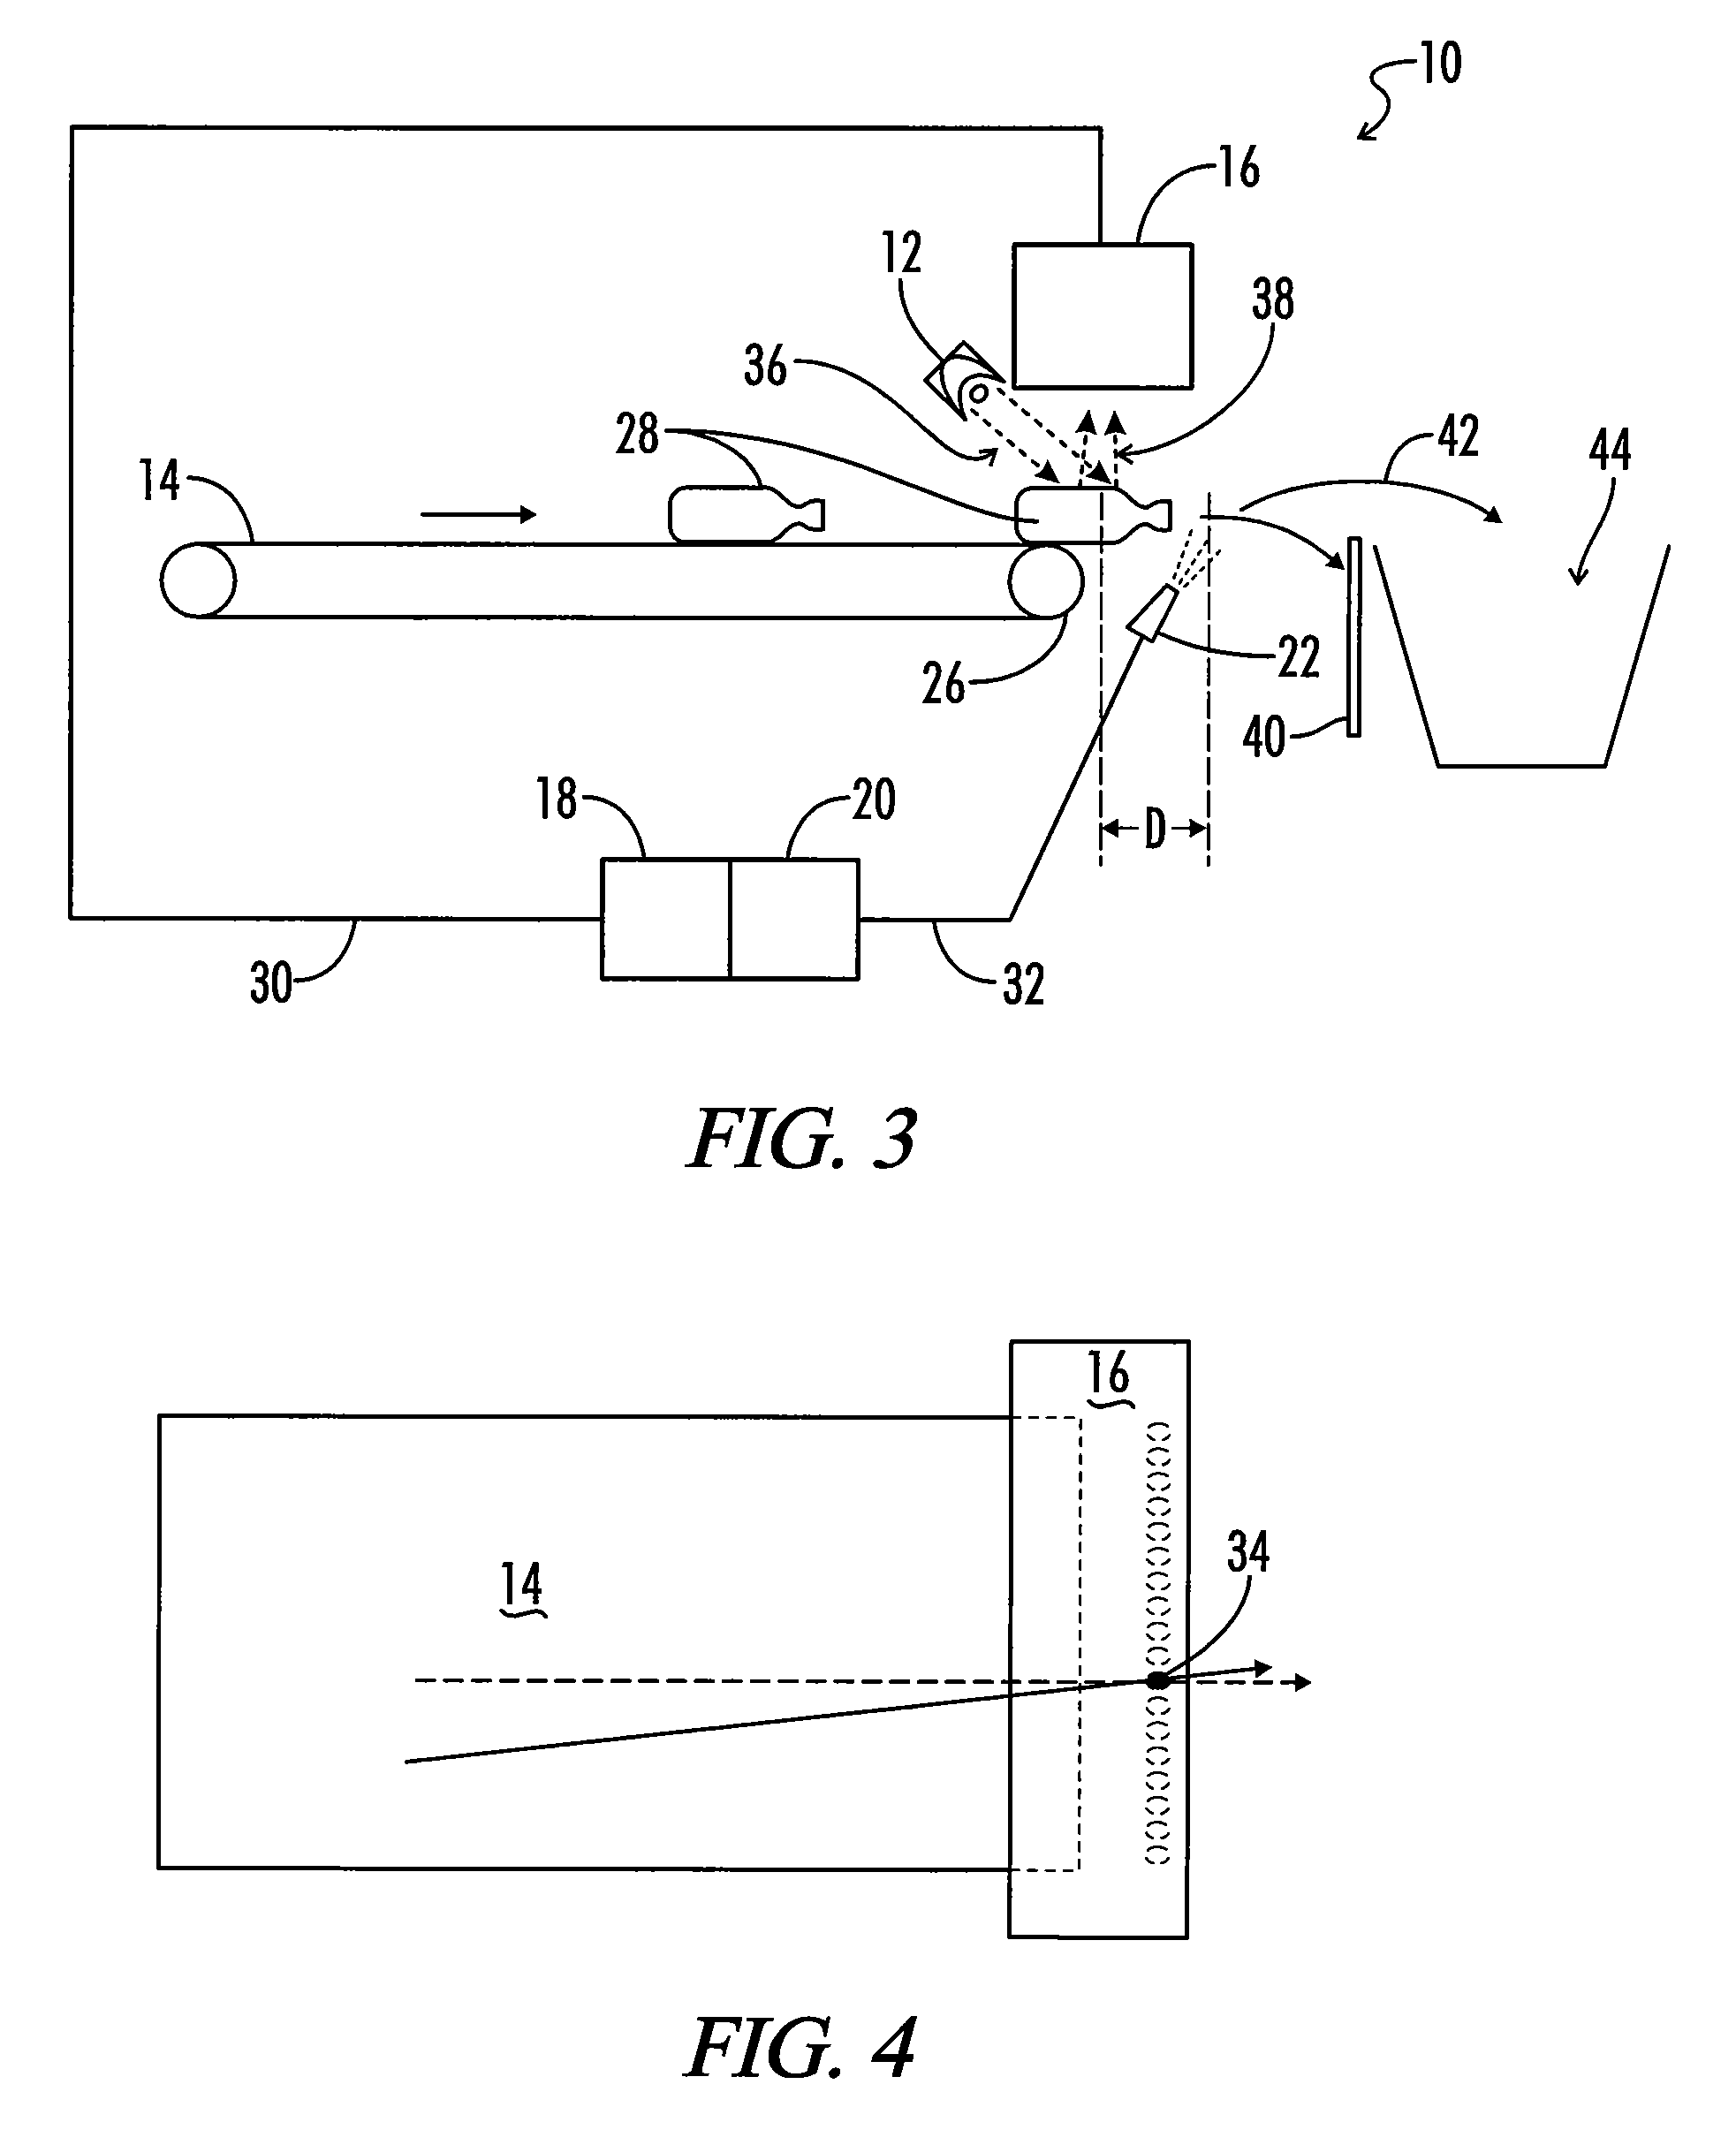 Method and apparatus for improving performance in container sorting